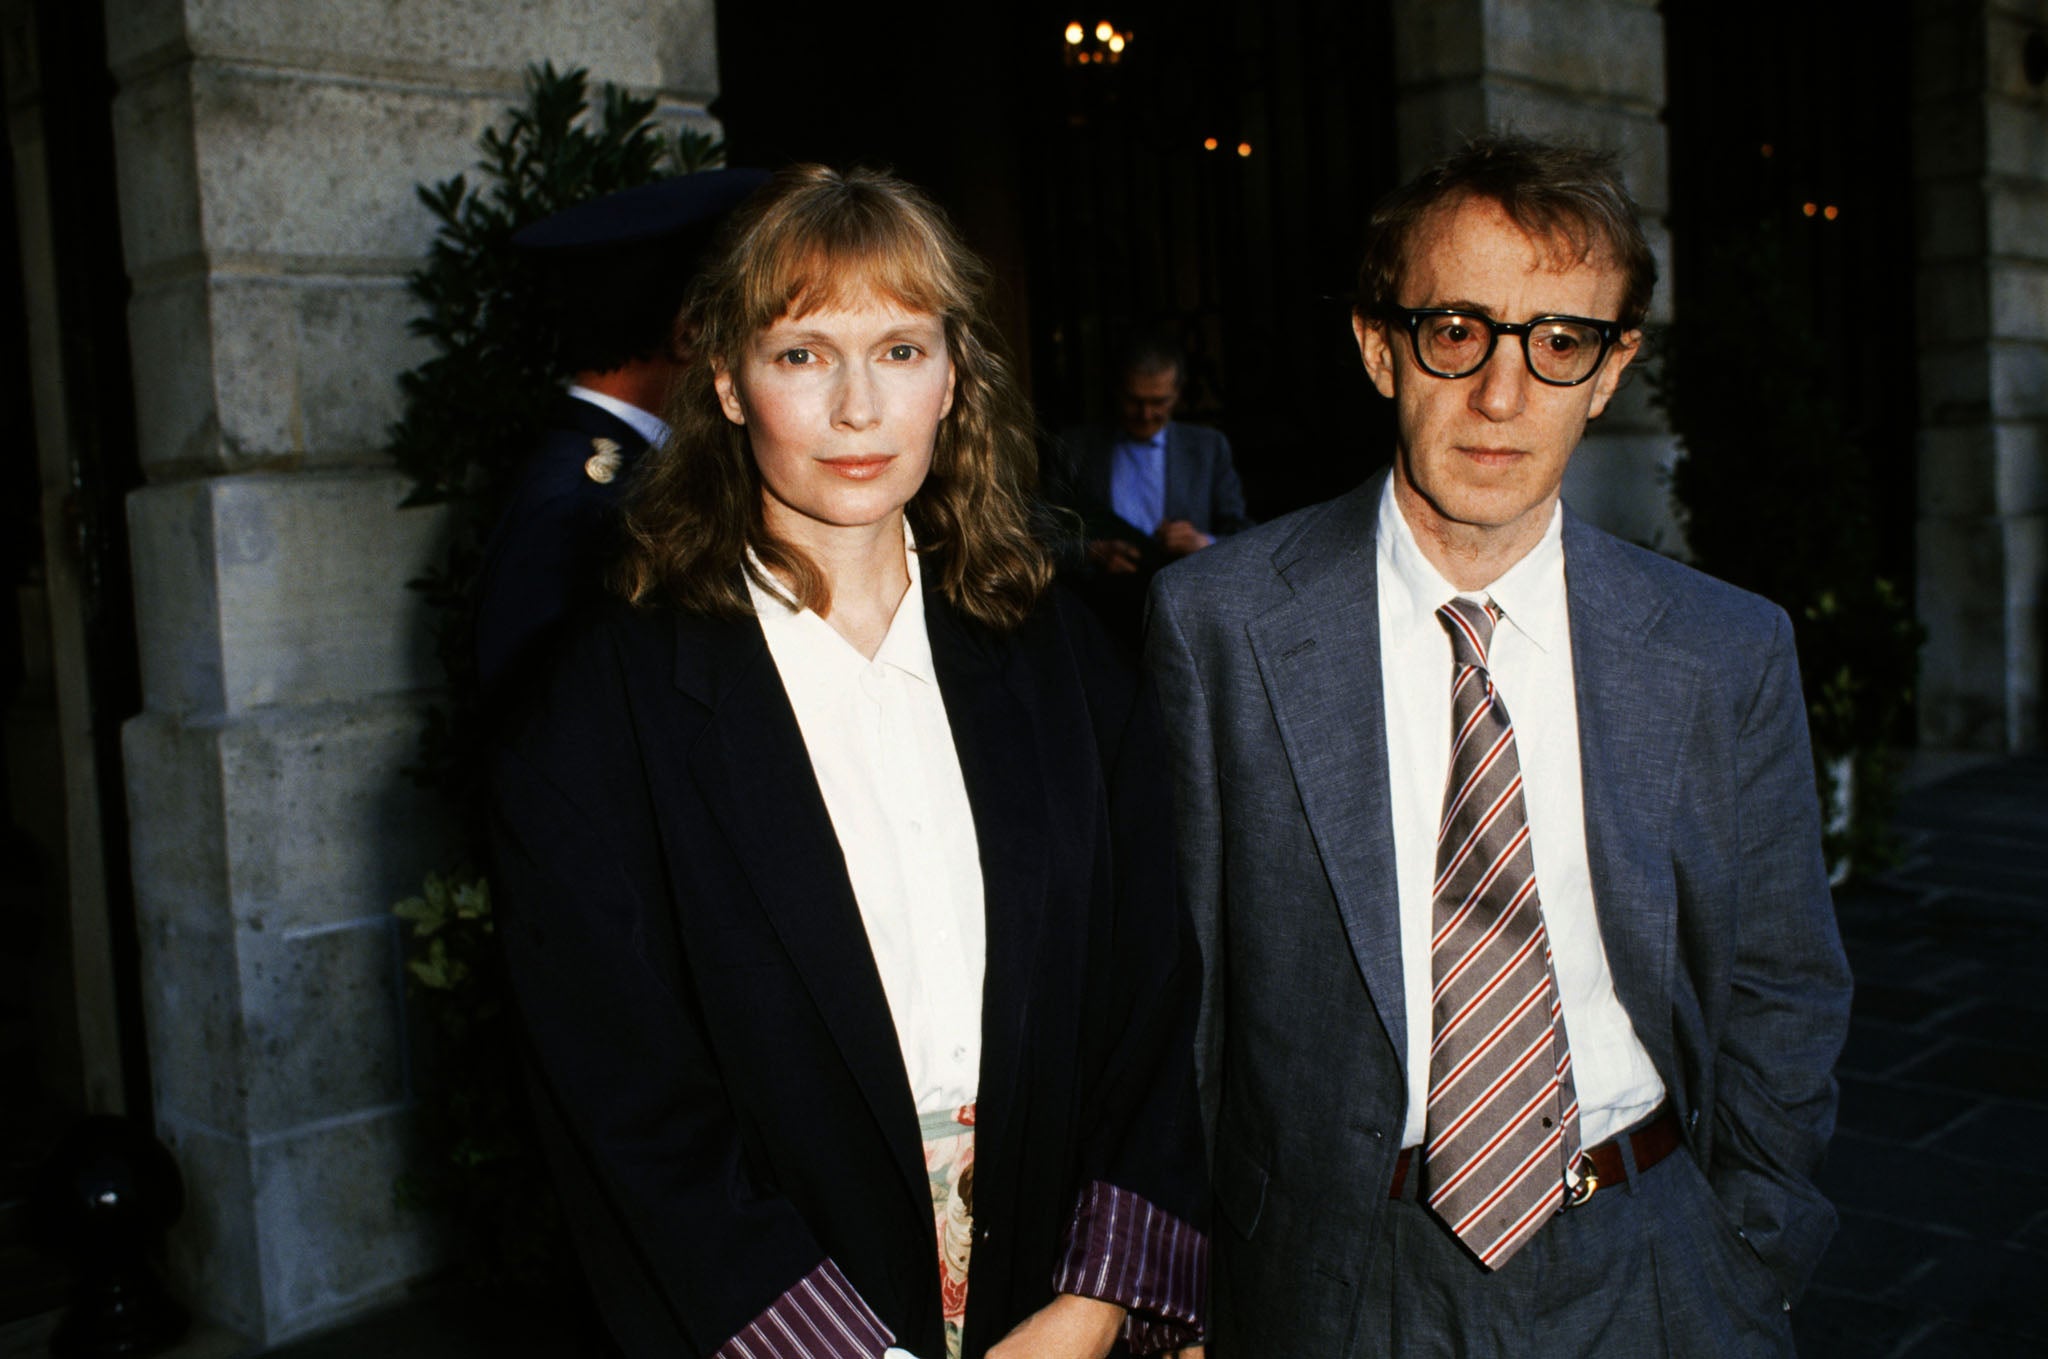 Mia Farrow and Woody Allen together in 1989.